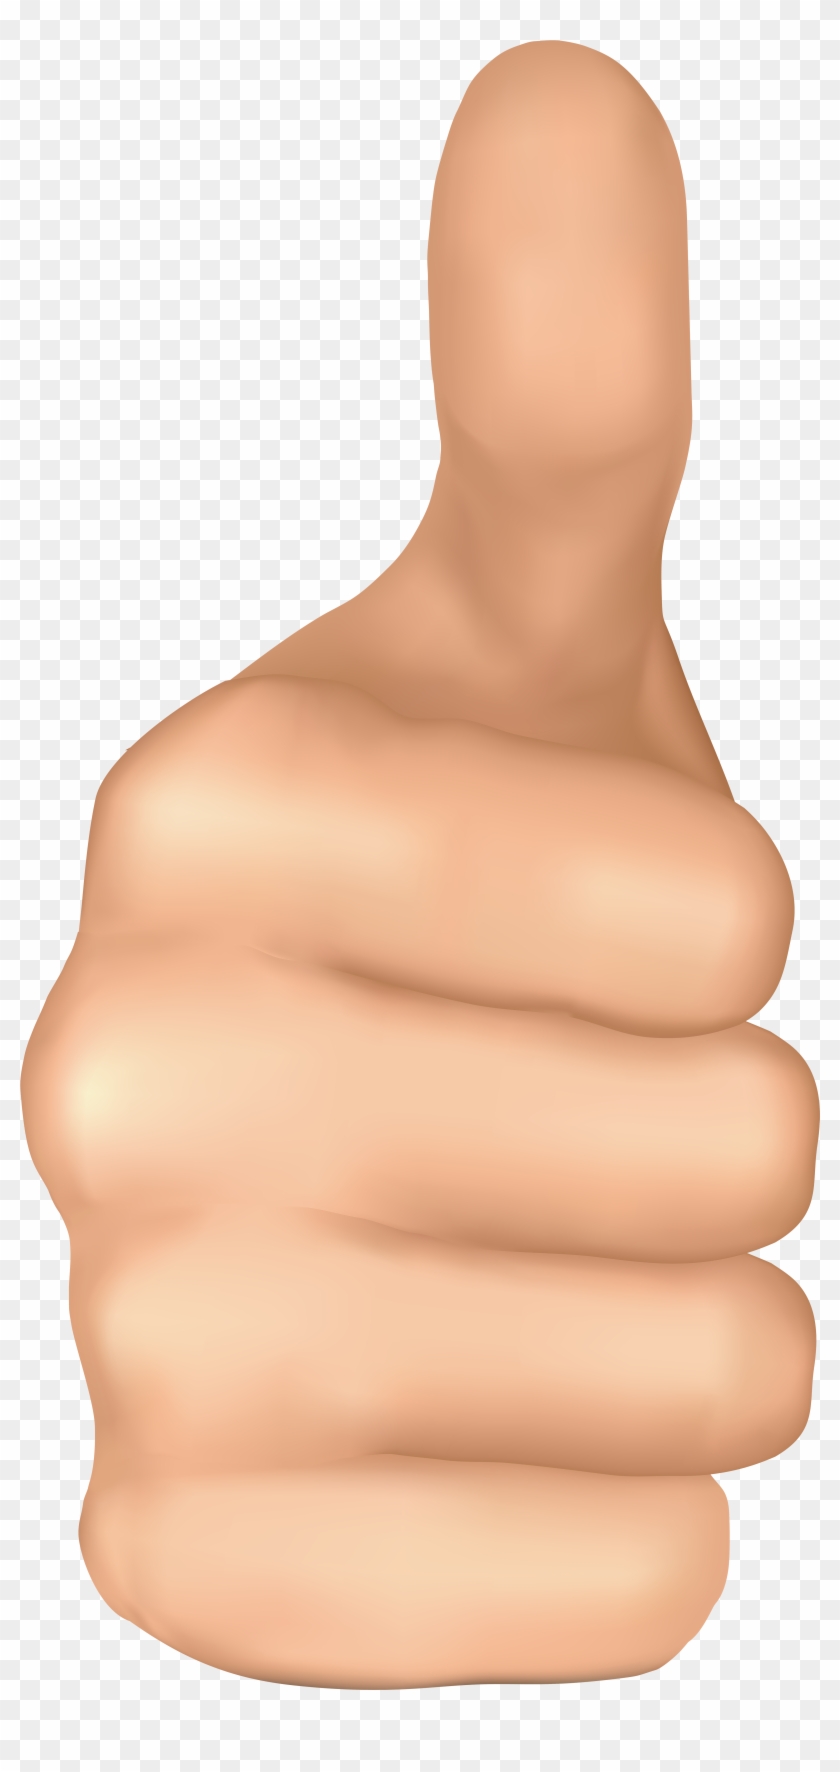 Thumbs Up Hand Png Clip Art - Mannequin #284328